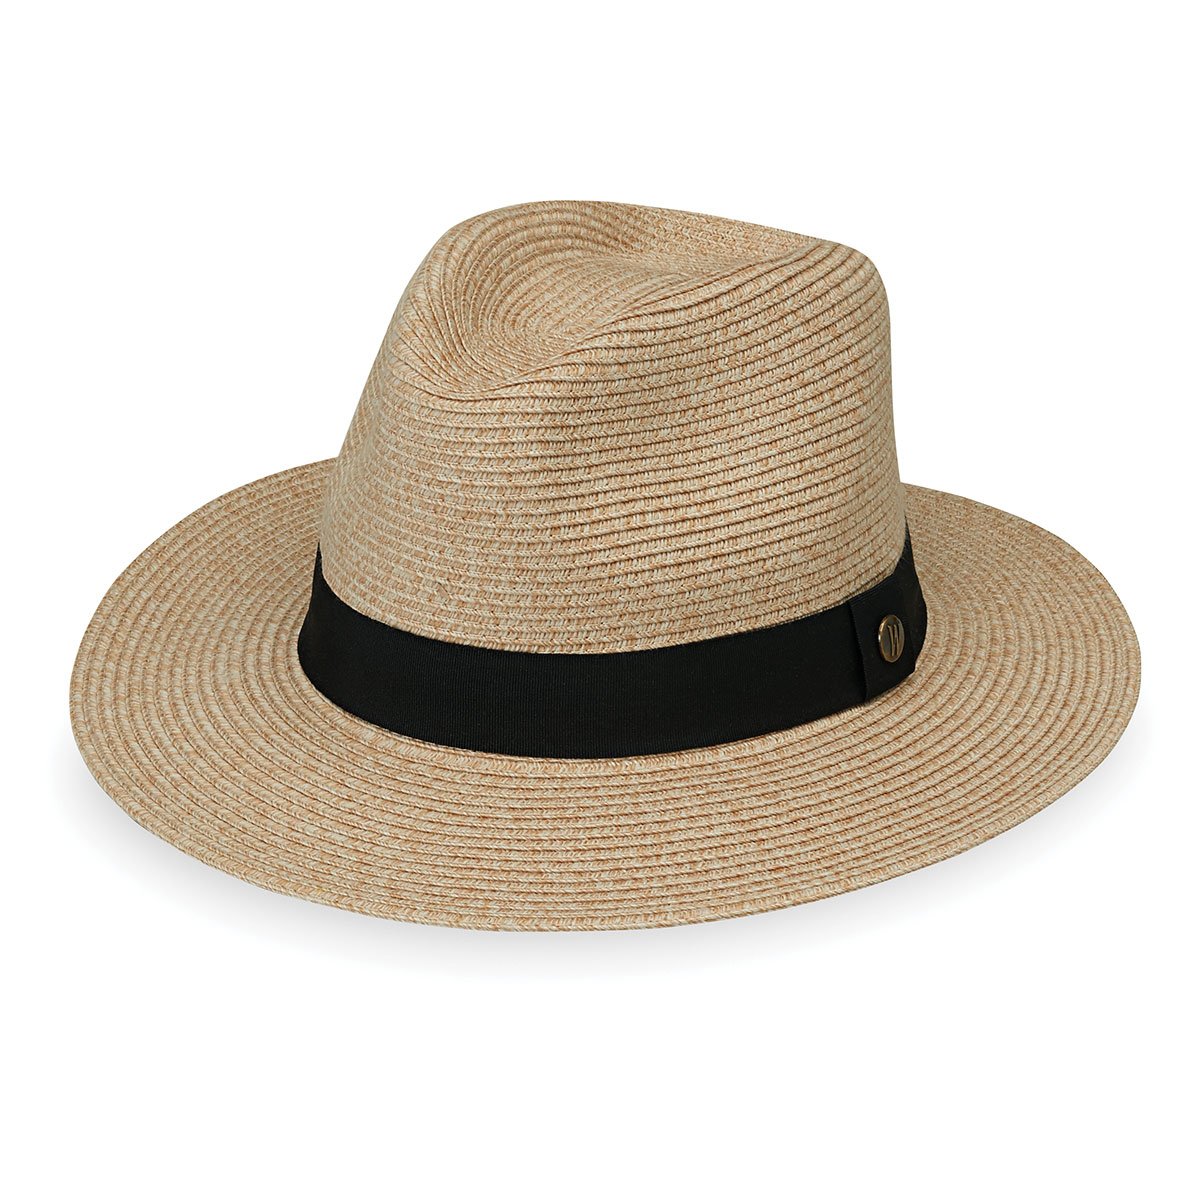 Featuring Front of Unisex Packable Fedora Style Outback UPF Sun Hat in Beige from Wallaroo